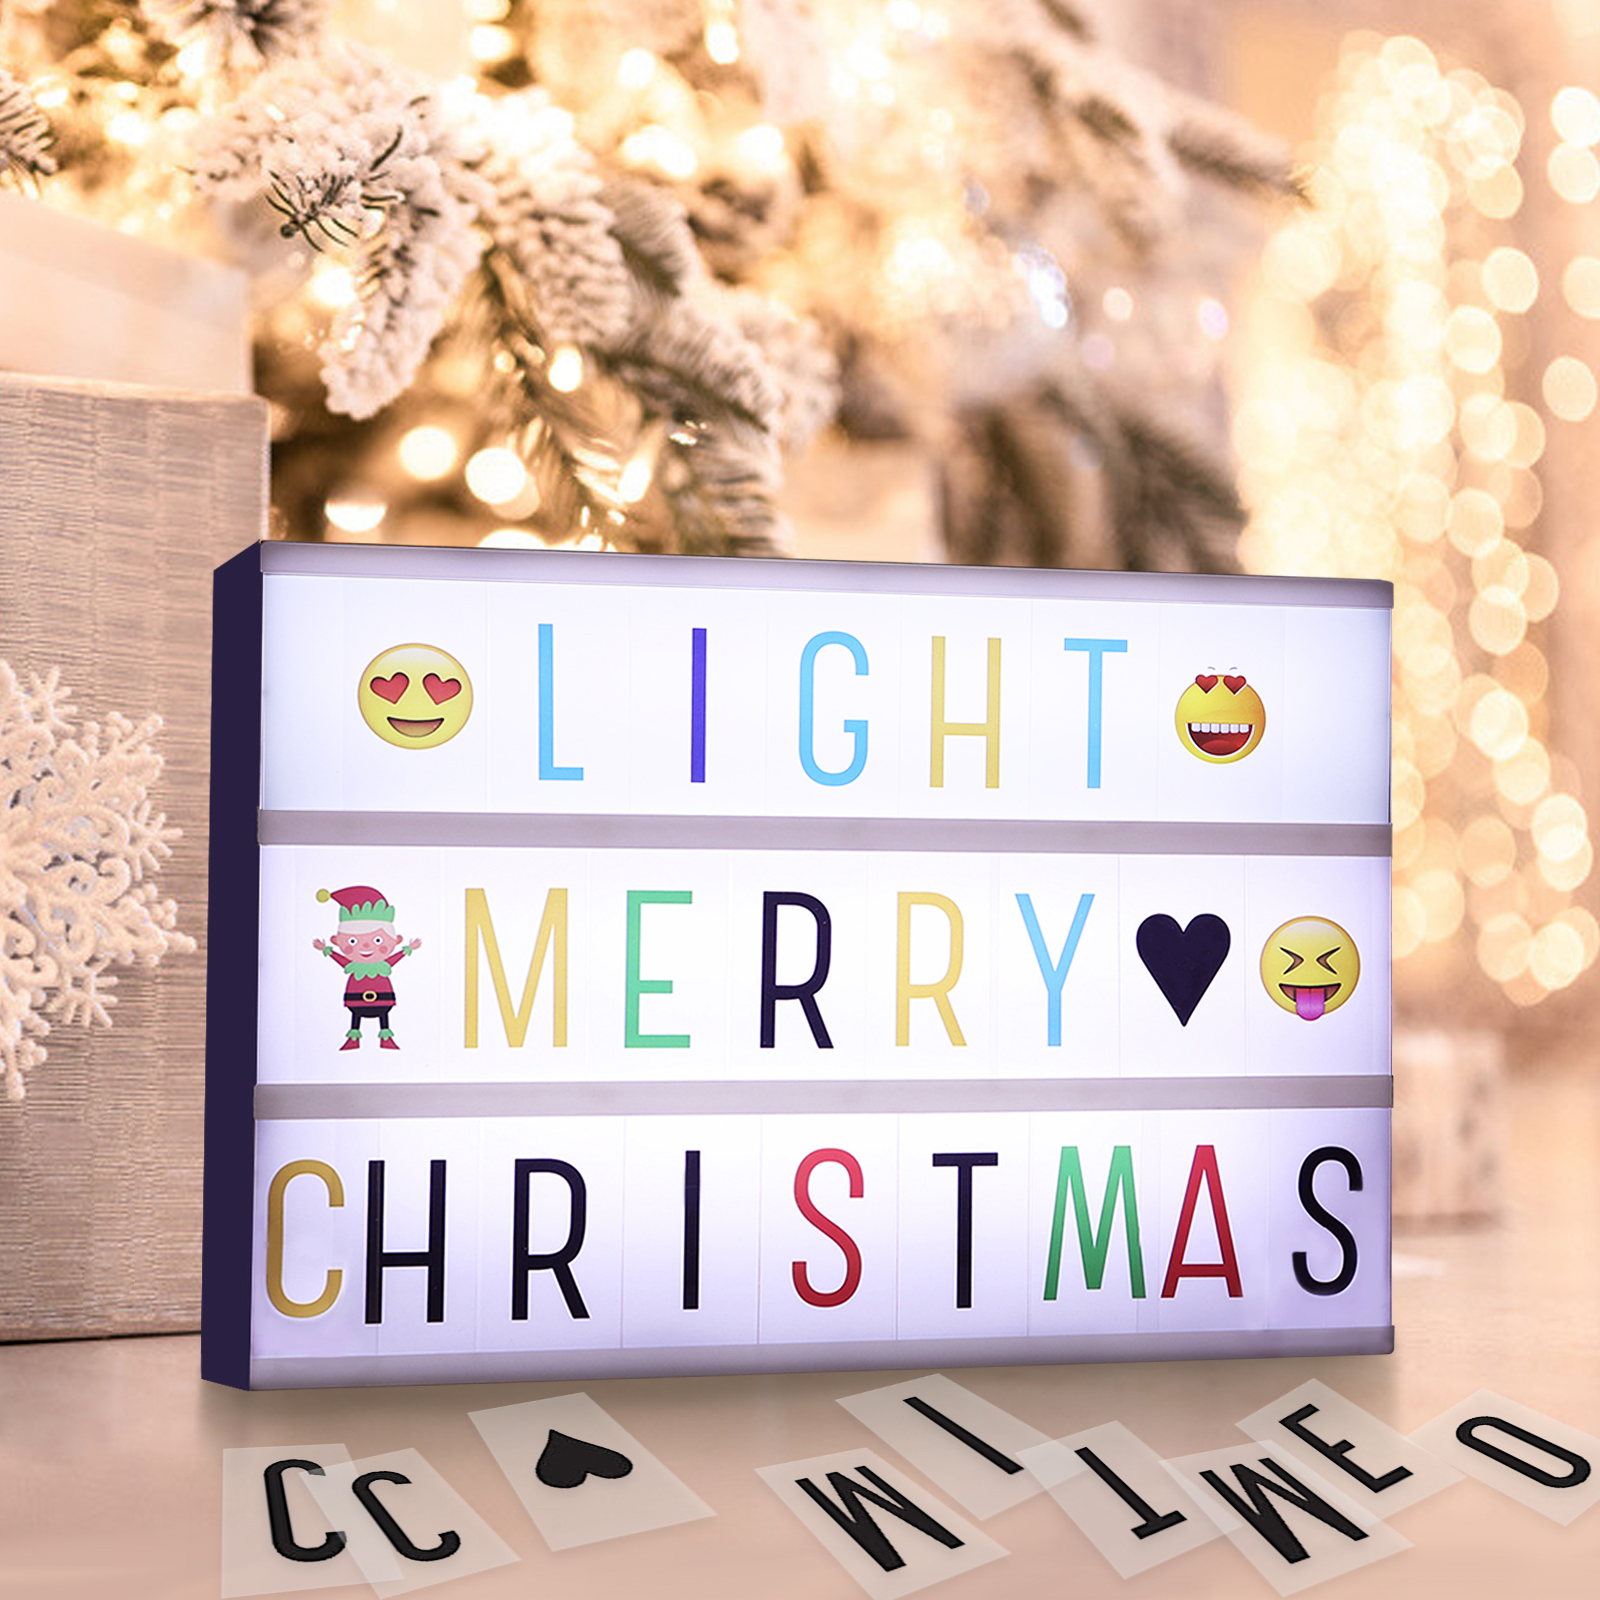 Find JETEVEN A4 LED Combination Light Box Night Light DIY Letter Symbol Card Decoration USB/Battery Powered Message Board for Sale on Gipsybee.com with cryptocurrencies